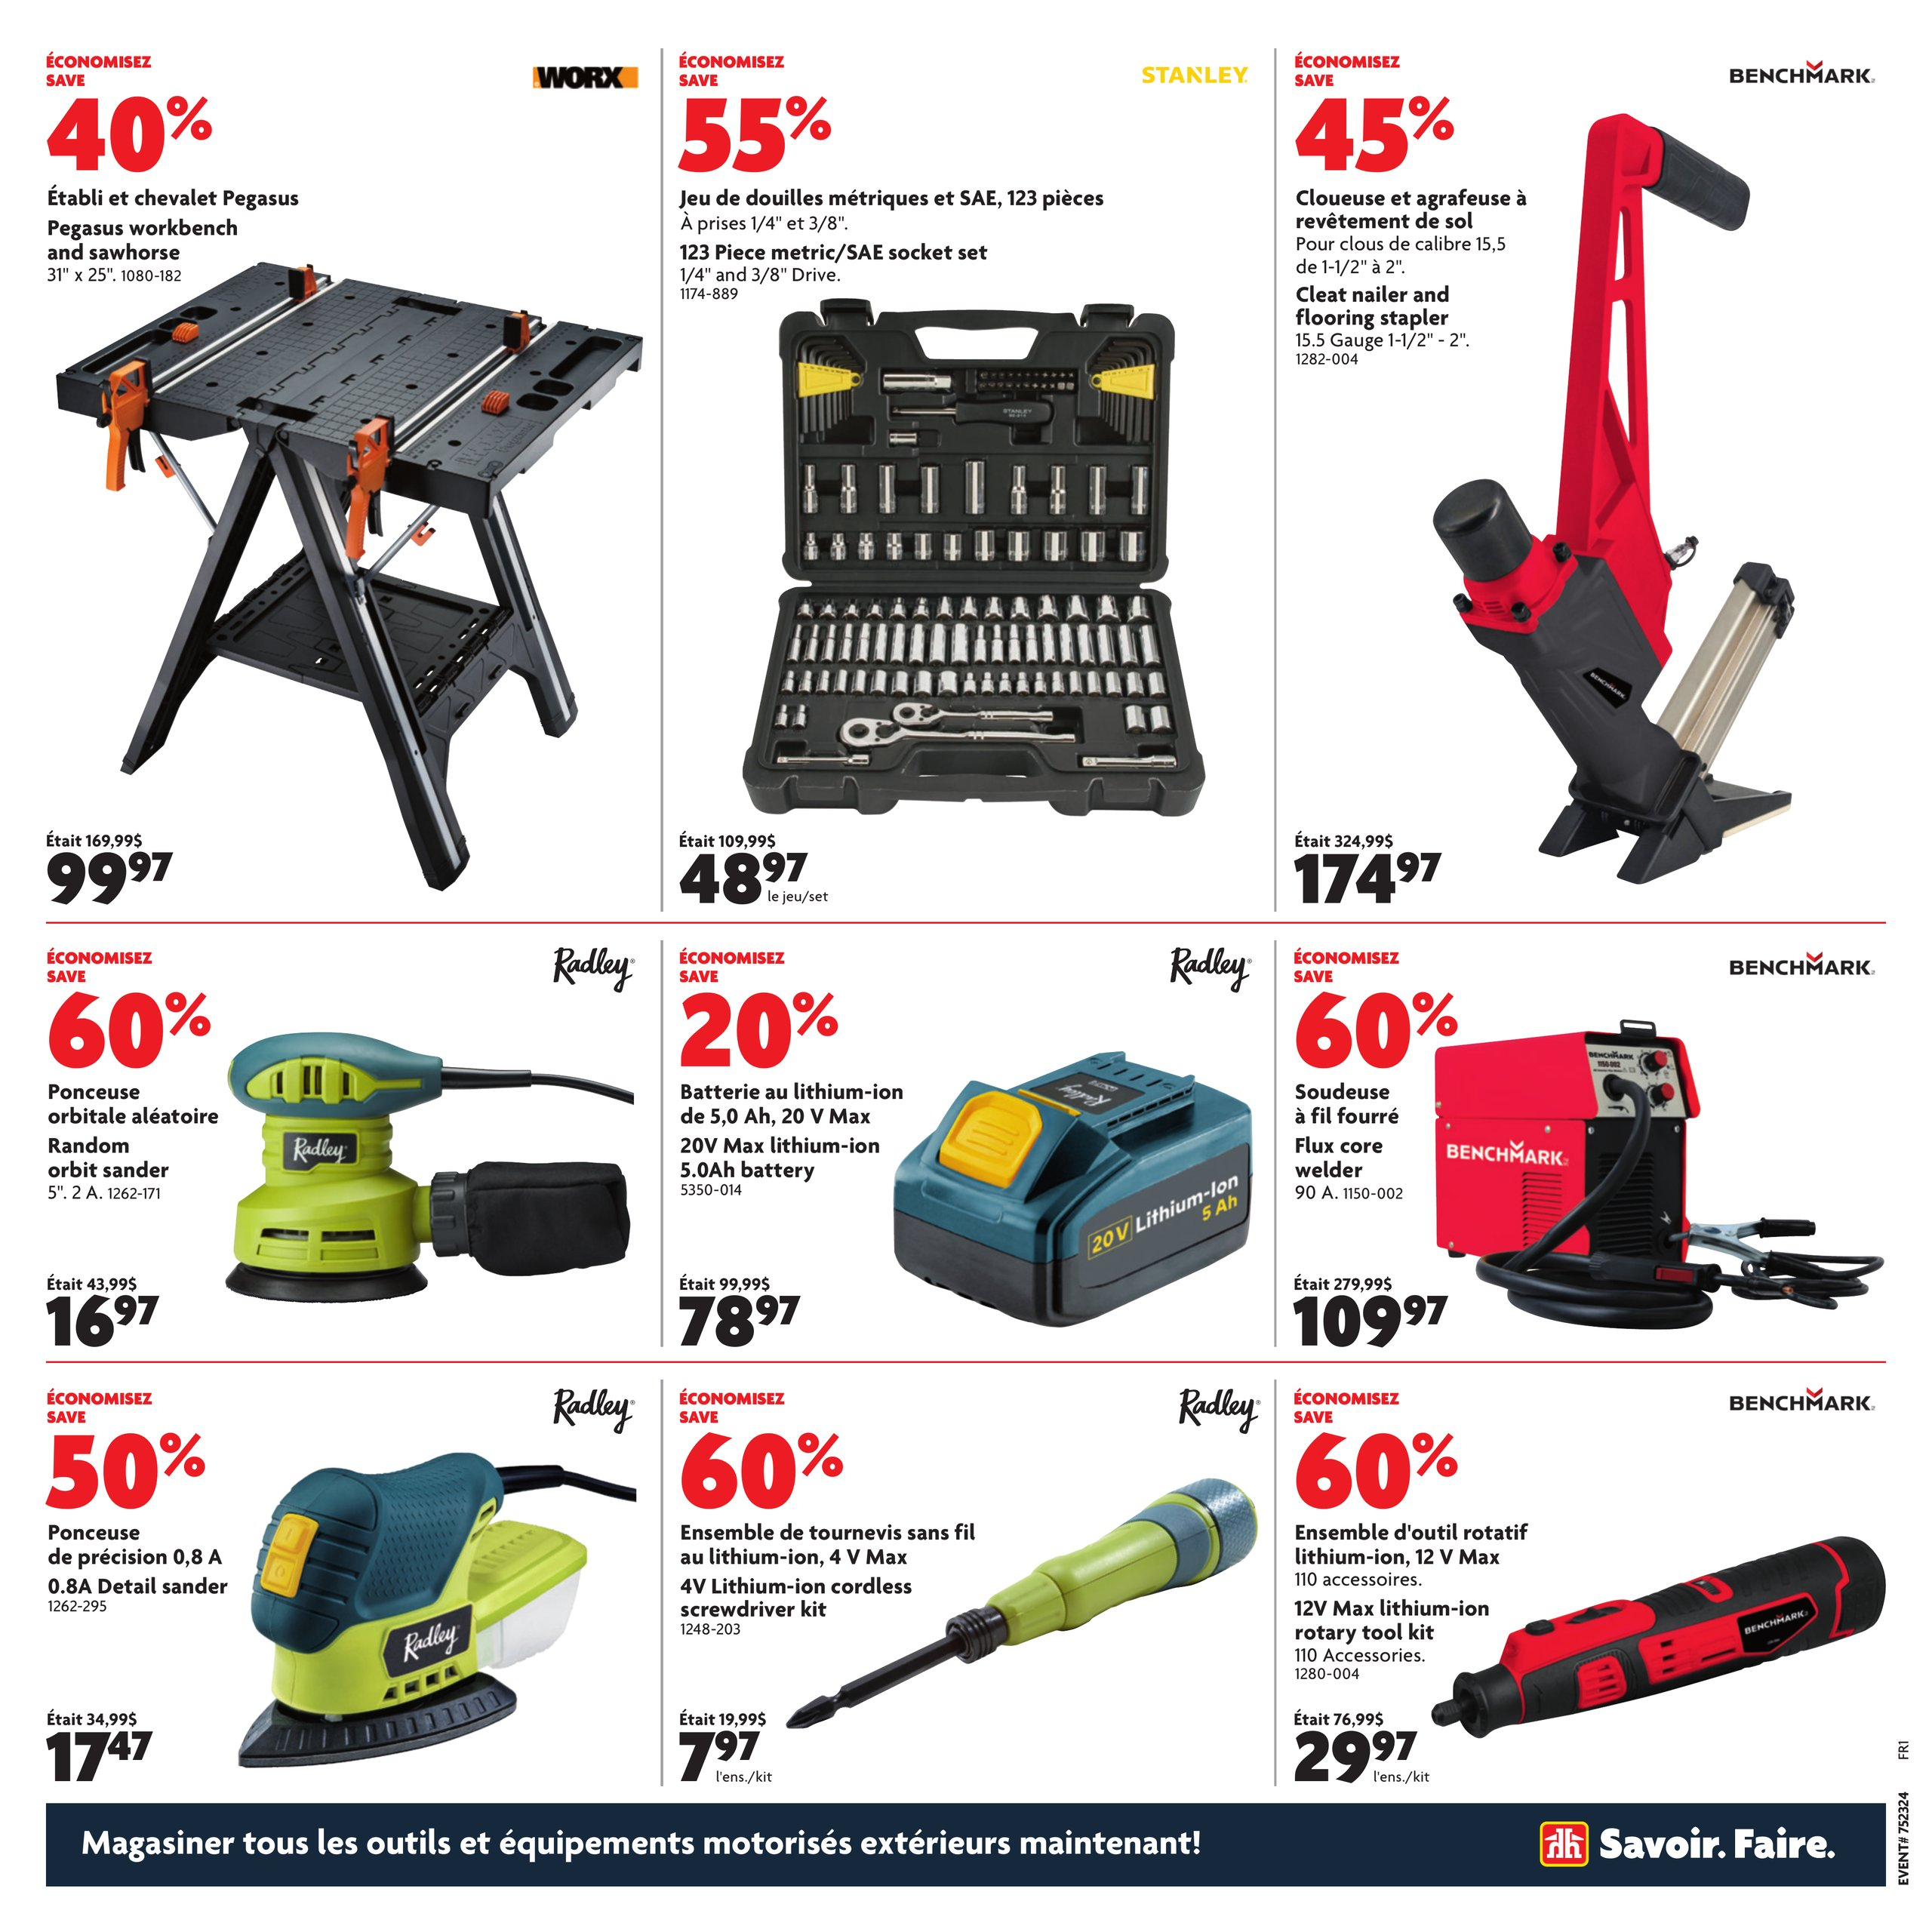 Circulaire Home Hardware - Page 11